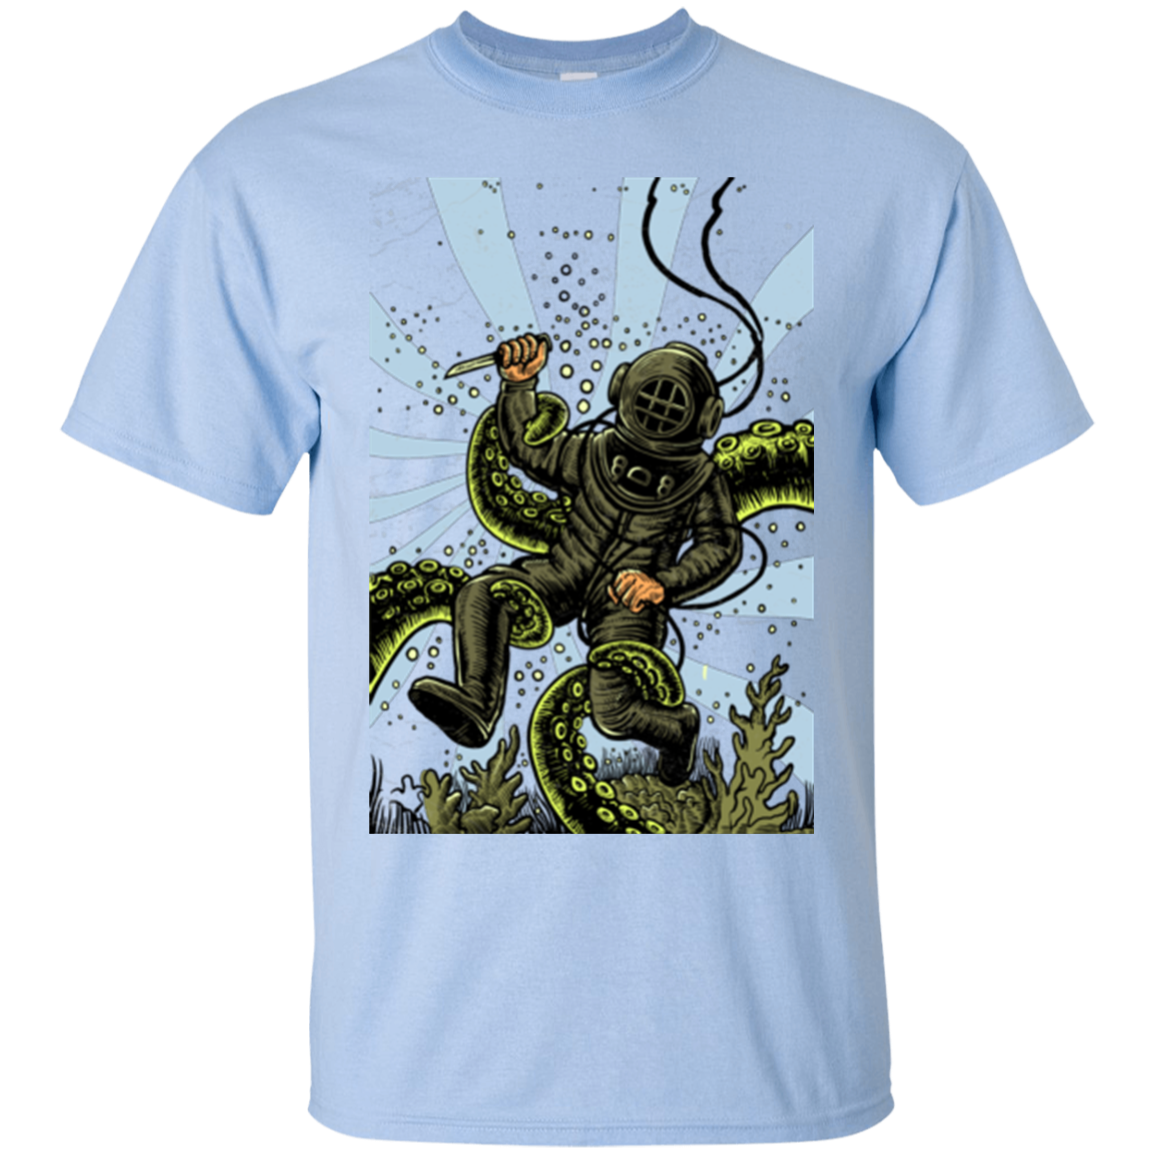 UNDER THE SEA T-SHIRT